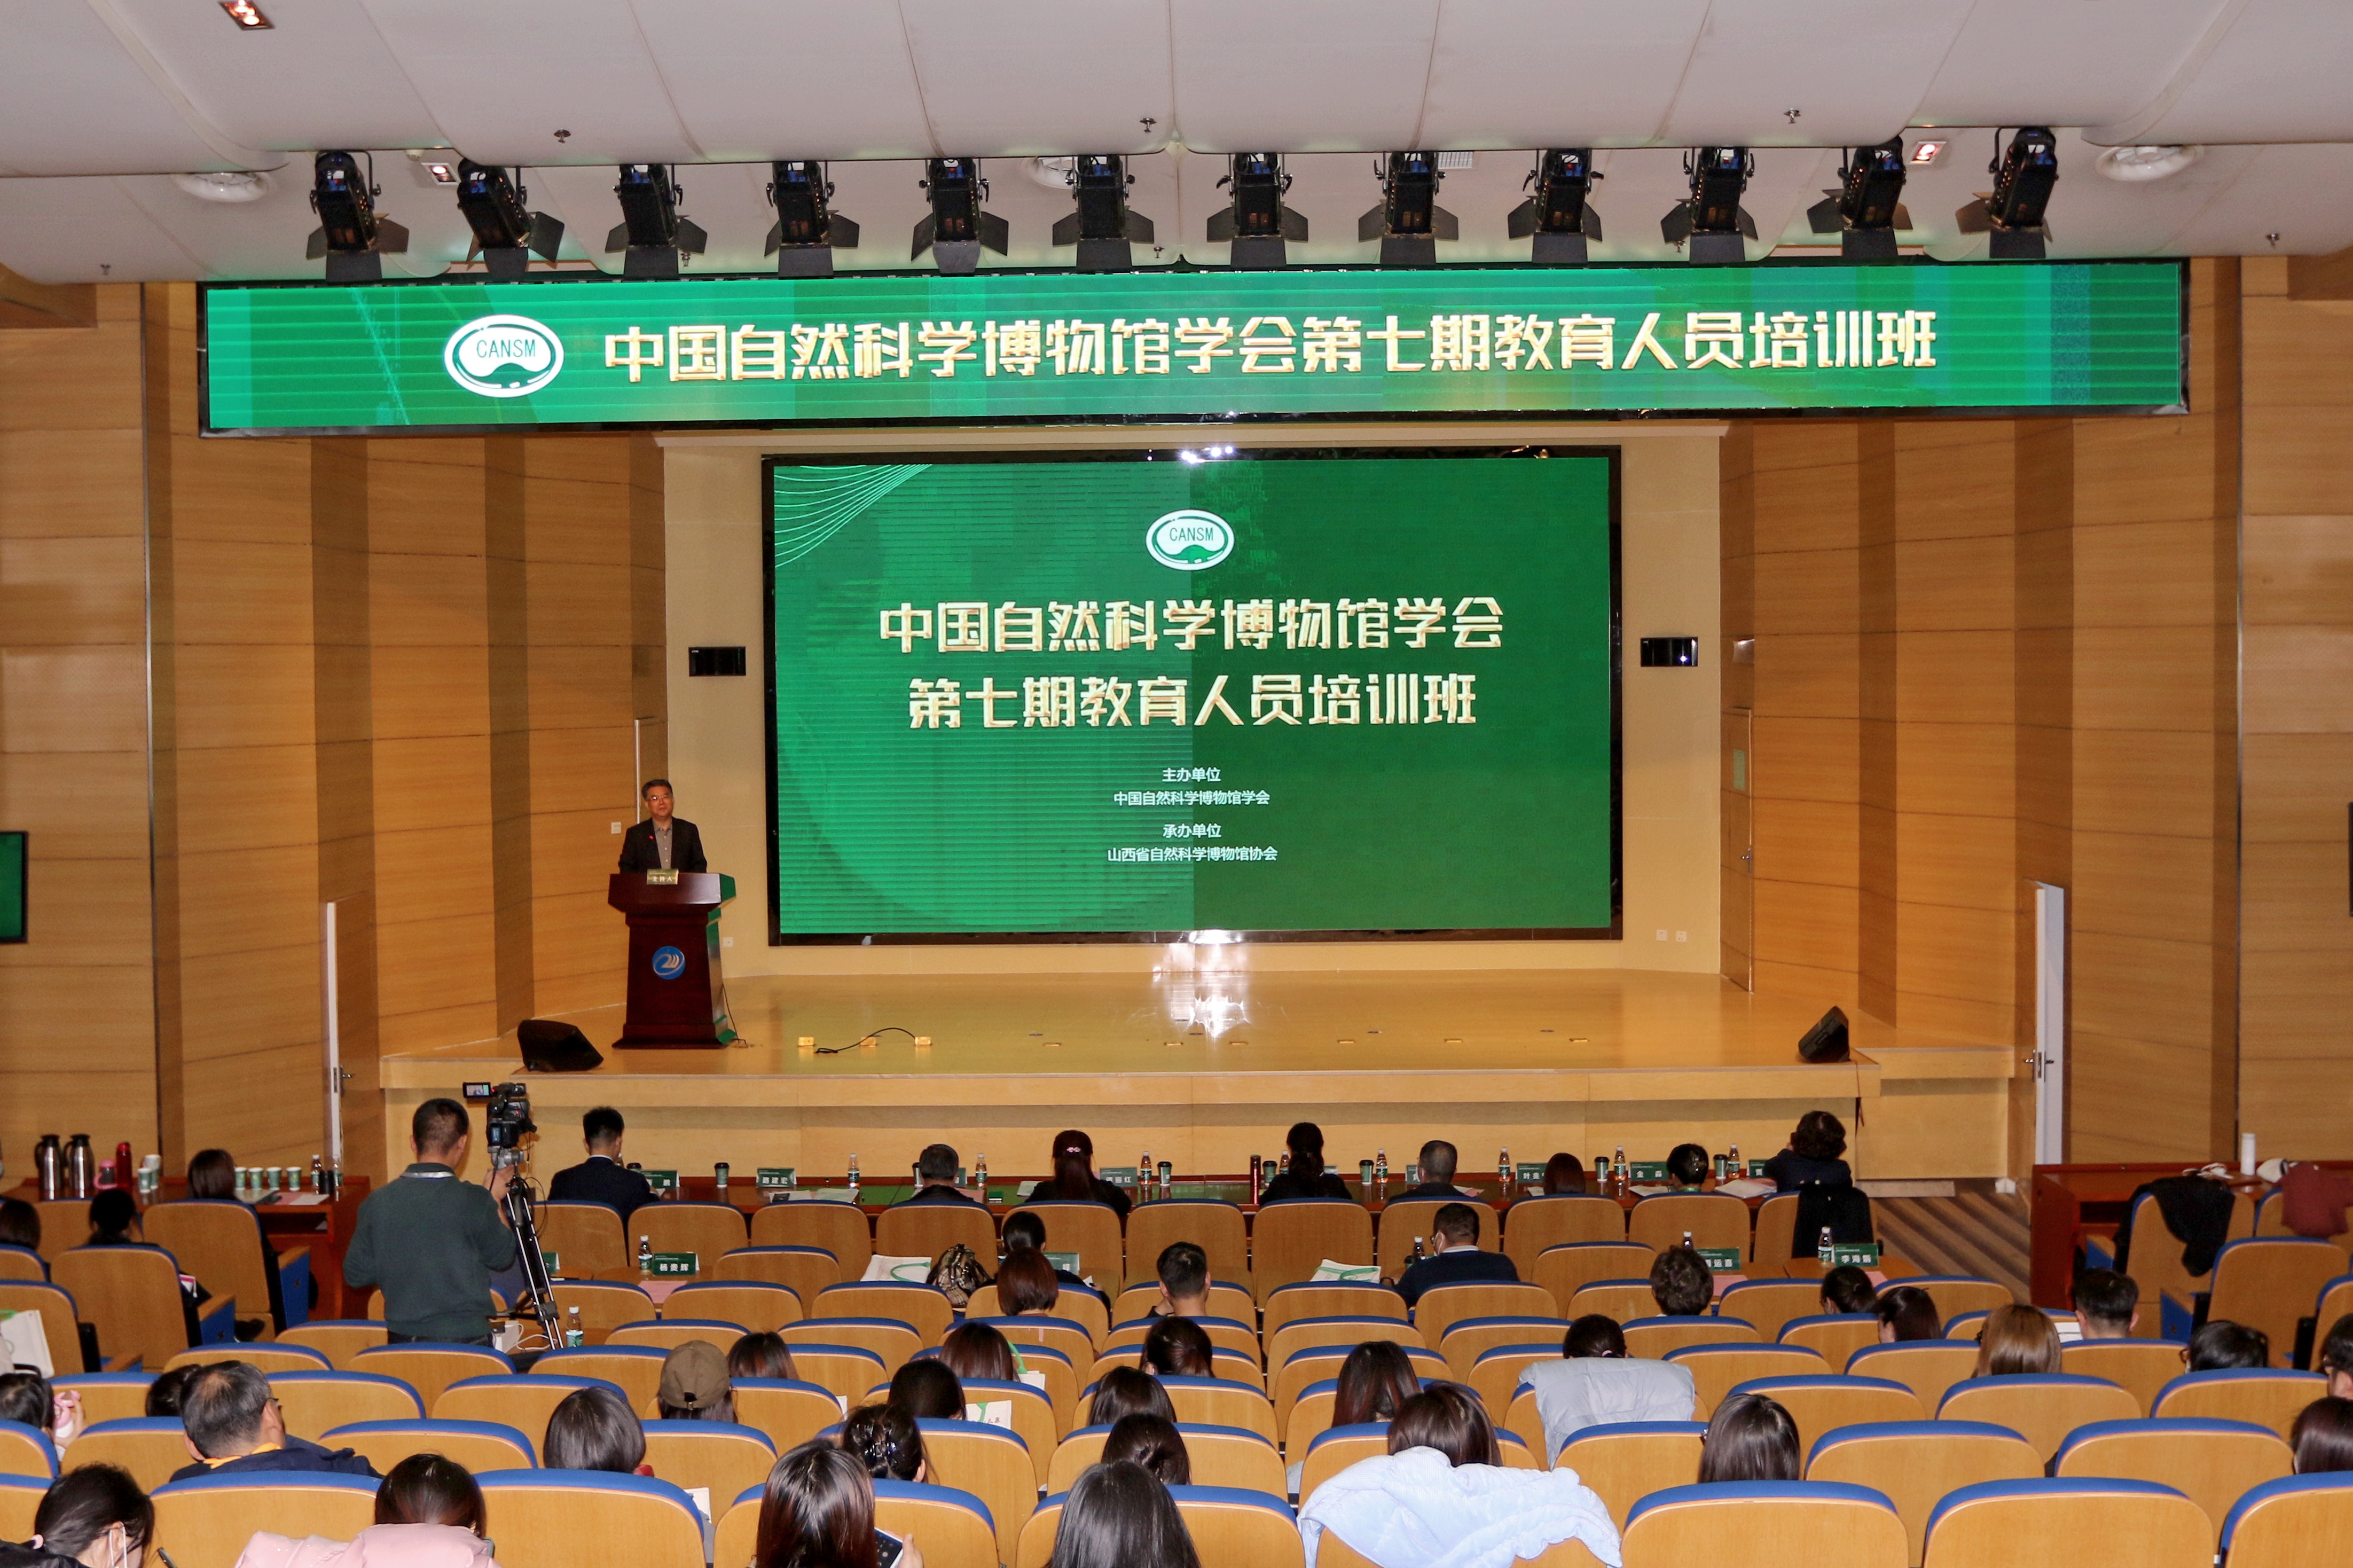 The Seventh Training Course for Educators of China Museum of Natural Science was held in Shanxi.